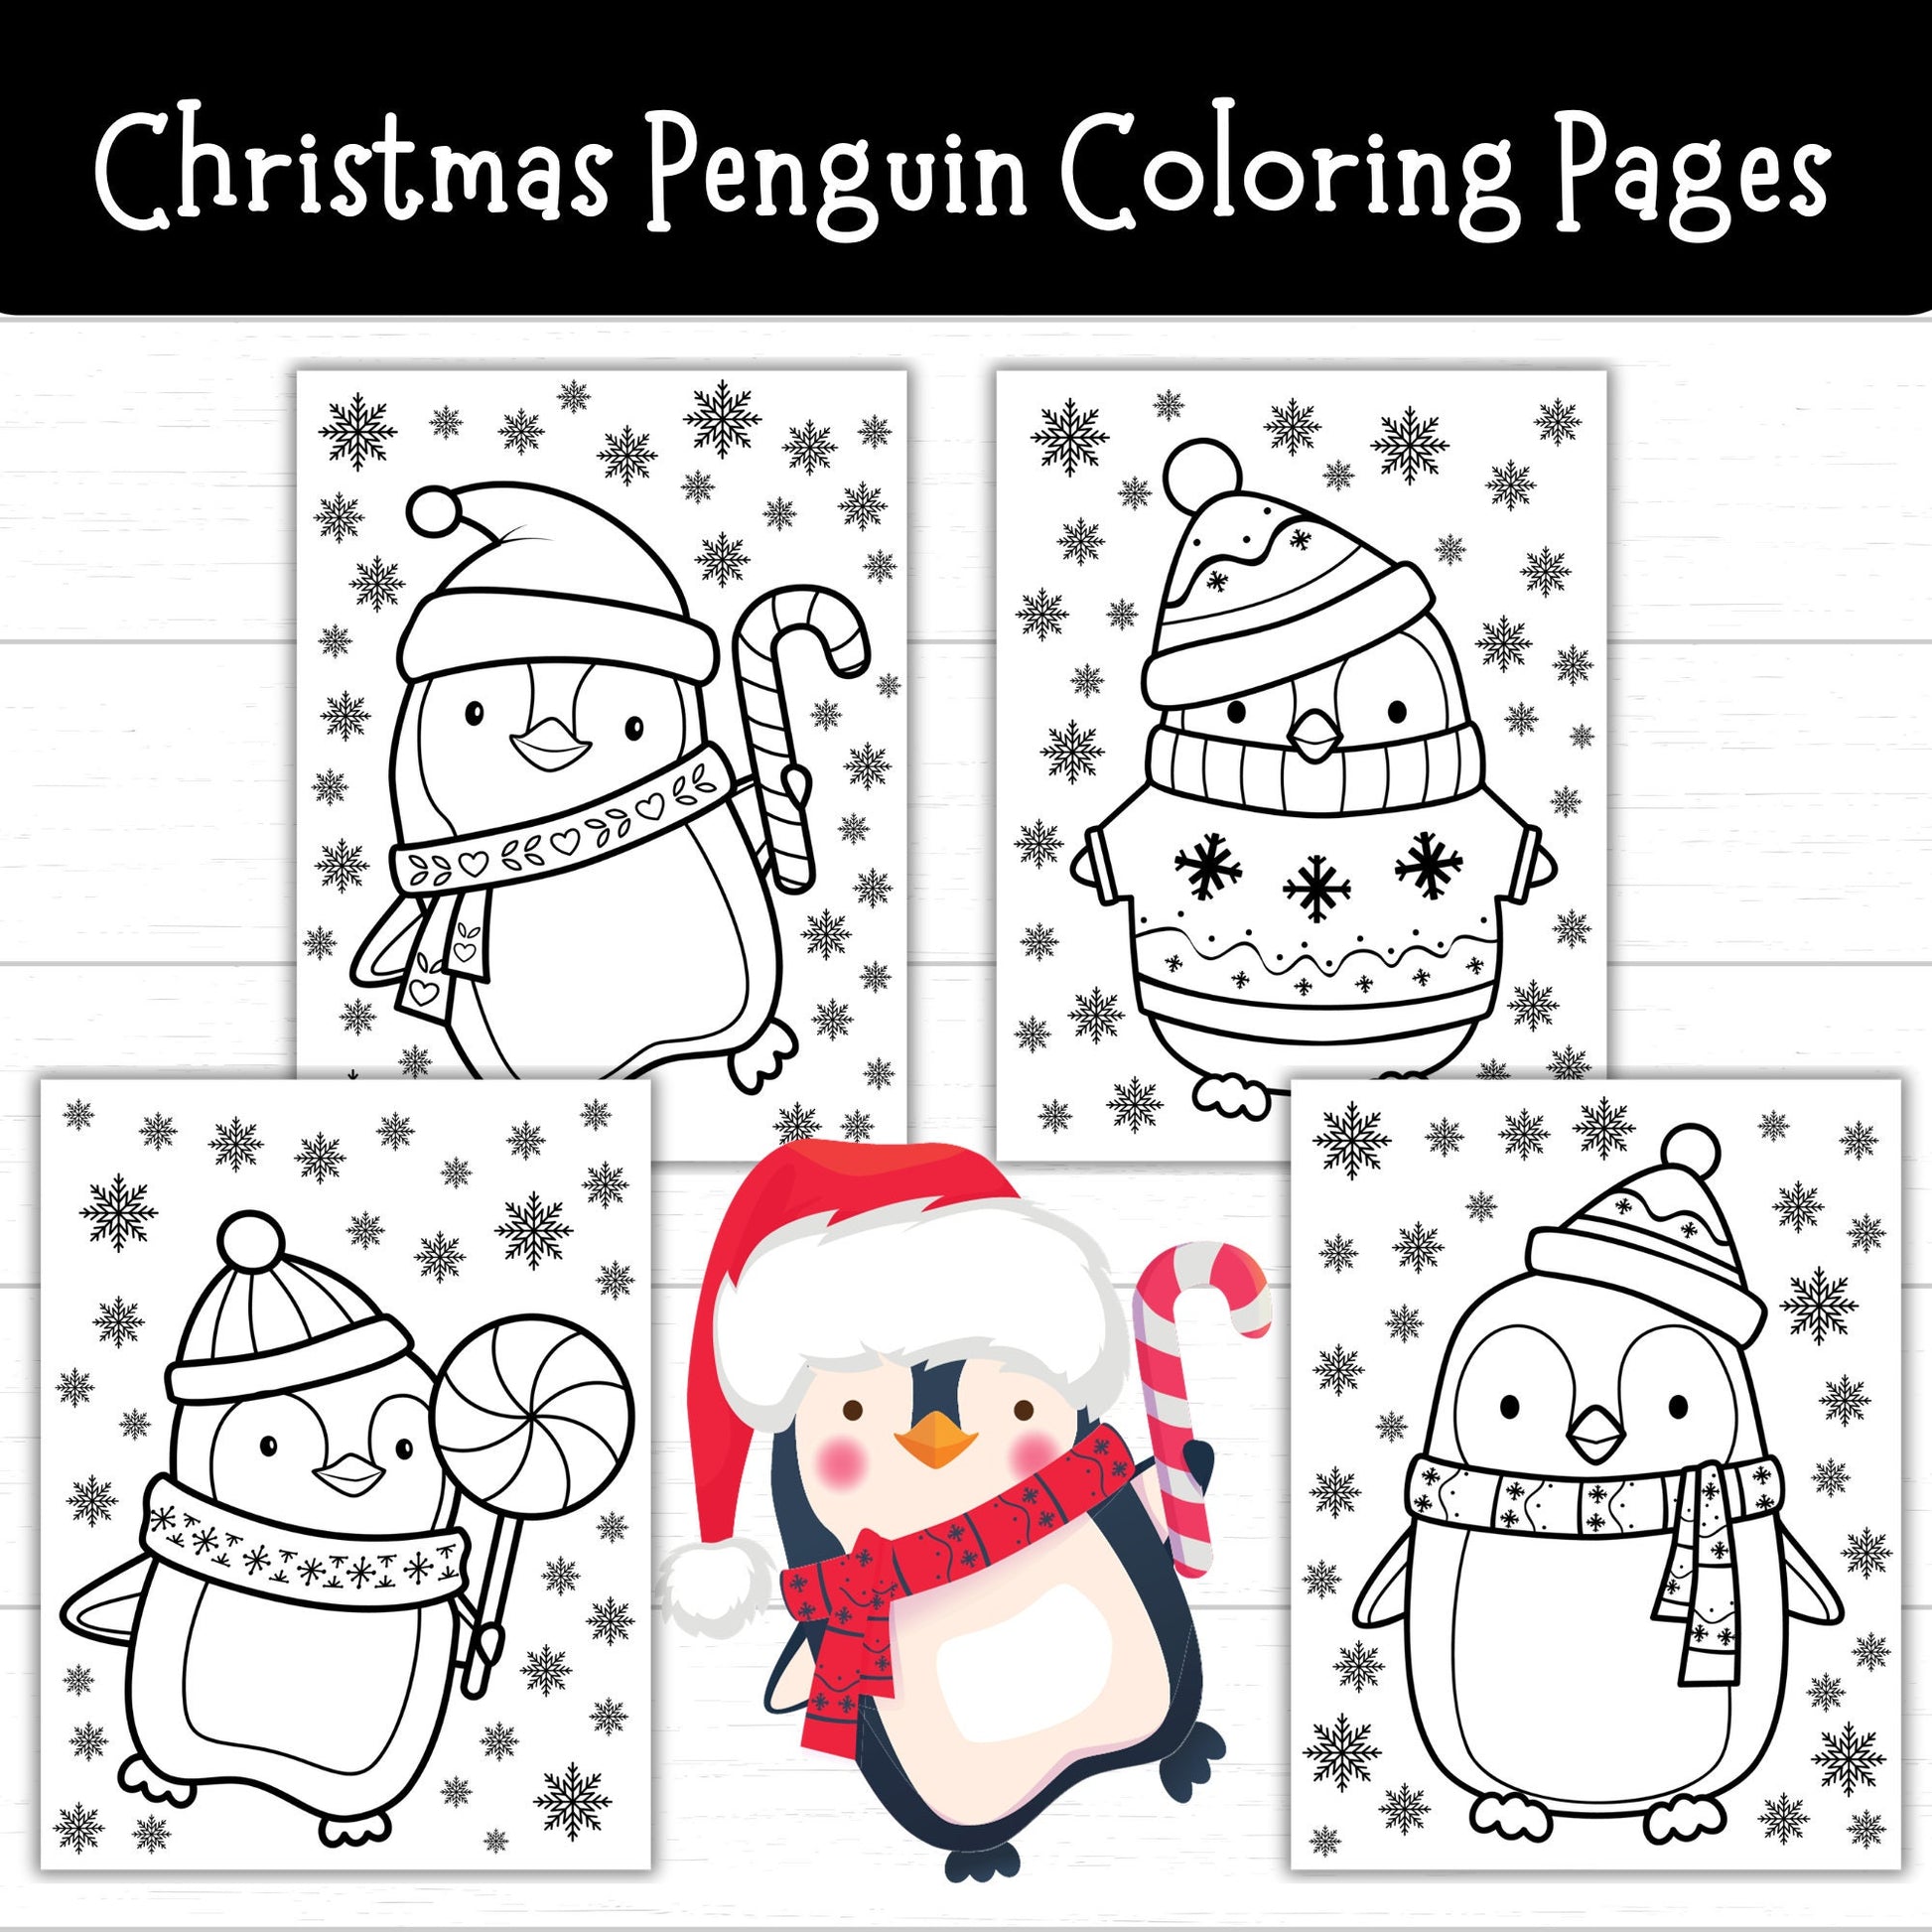 Christmas penguin coloring pages â mom wife busy life printables